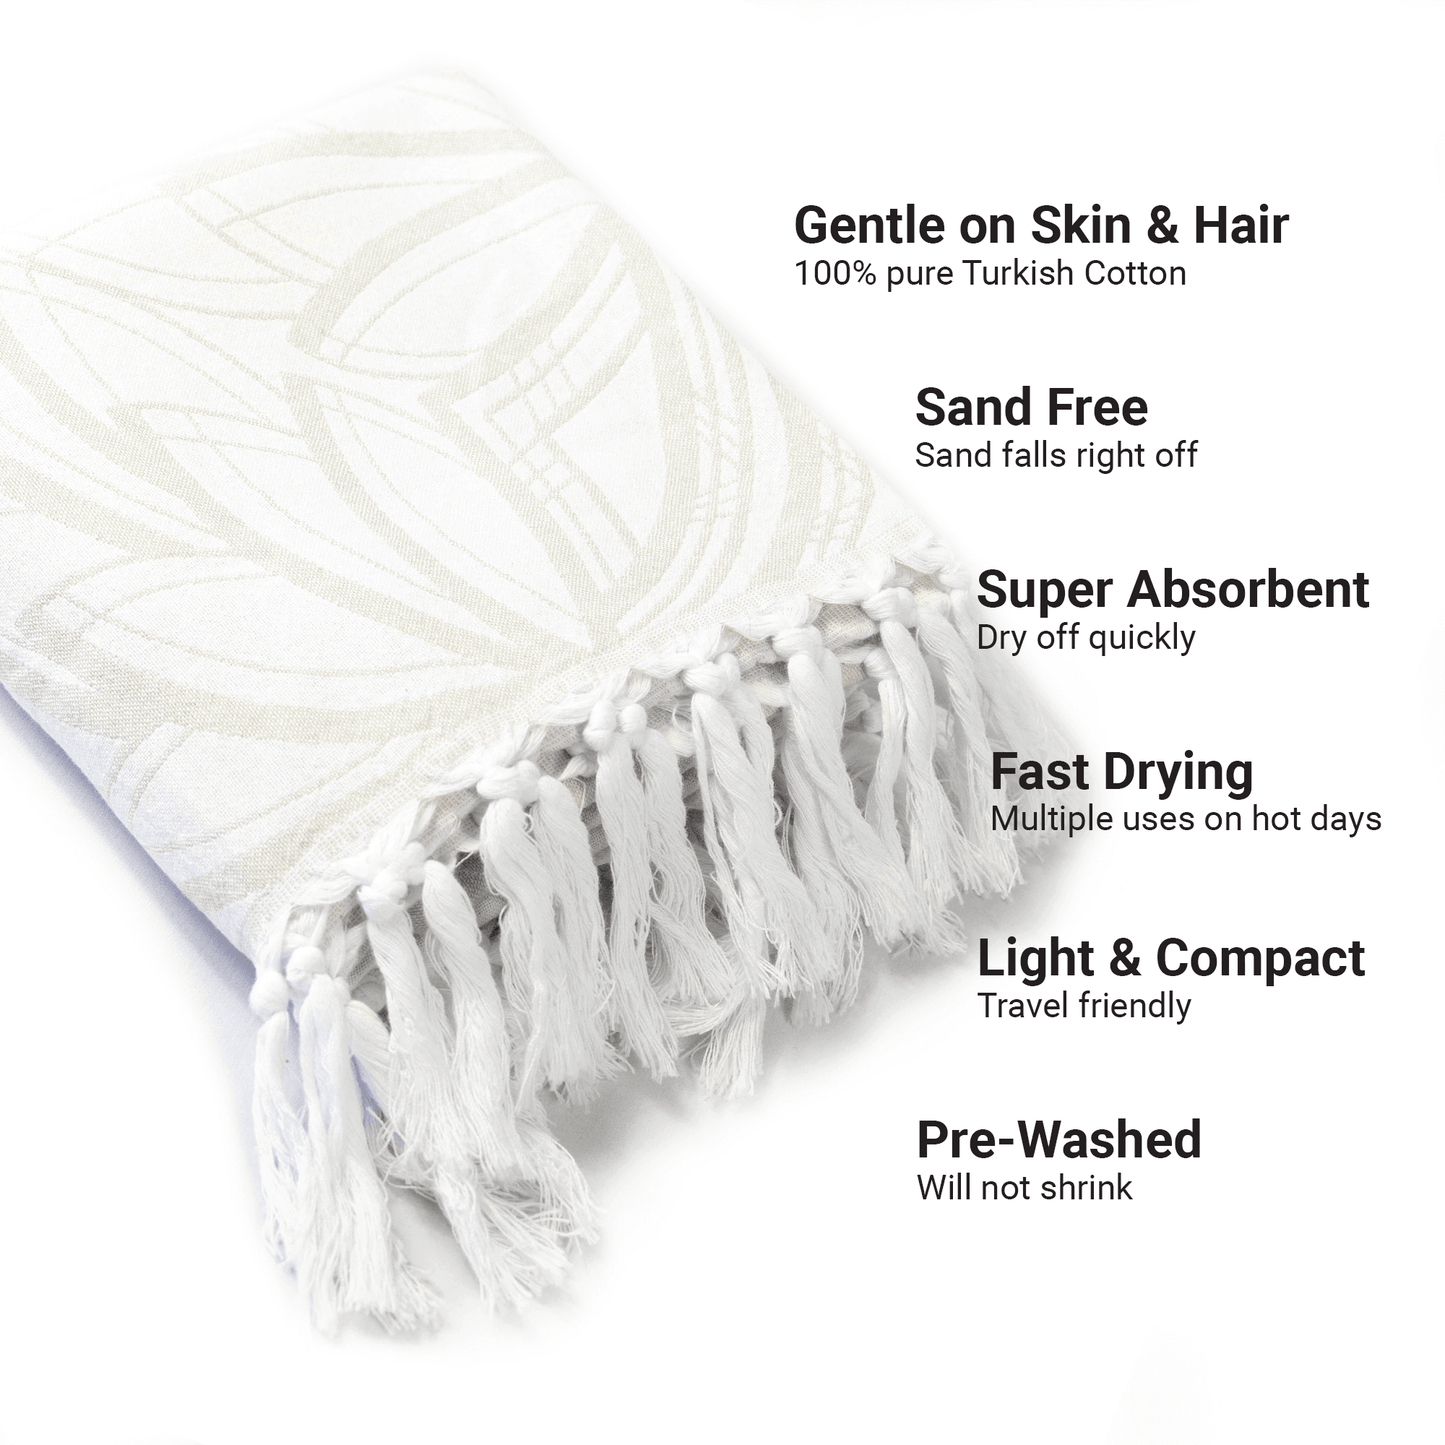 Oat and white Turkish towel with white tassels